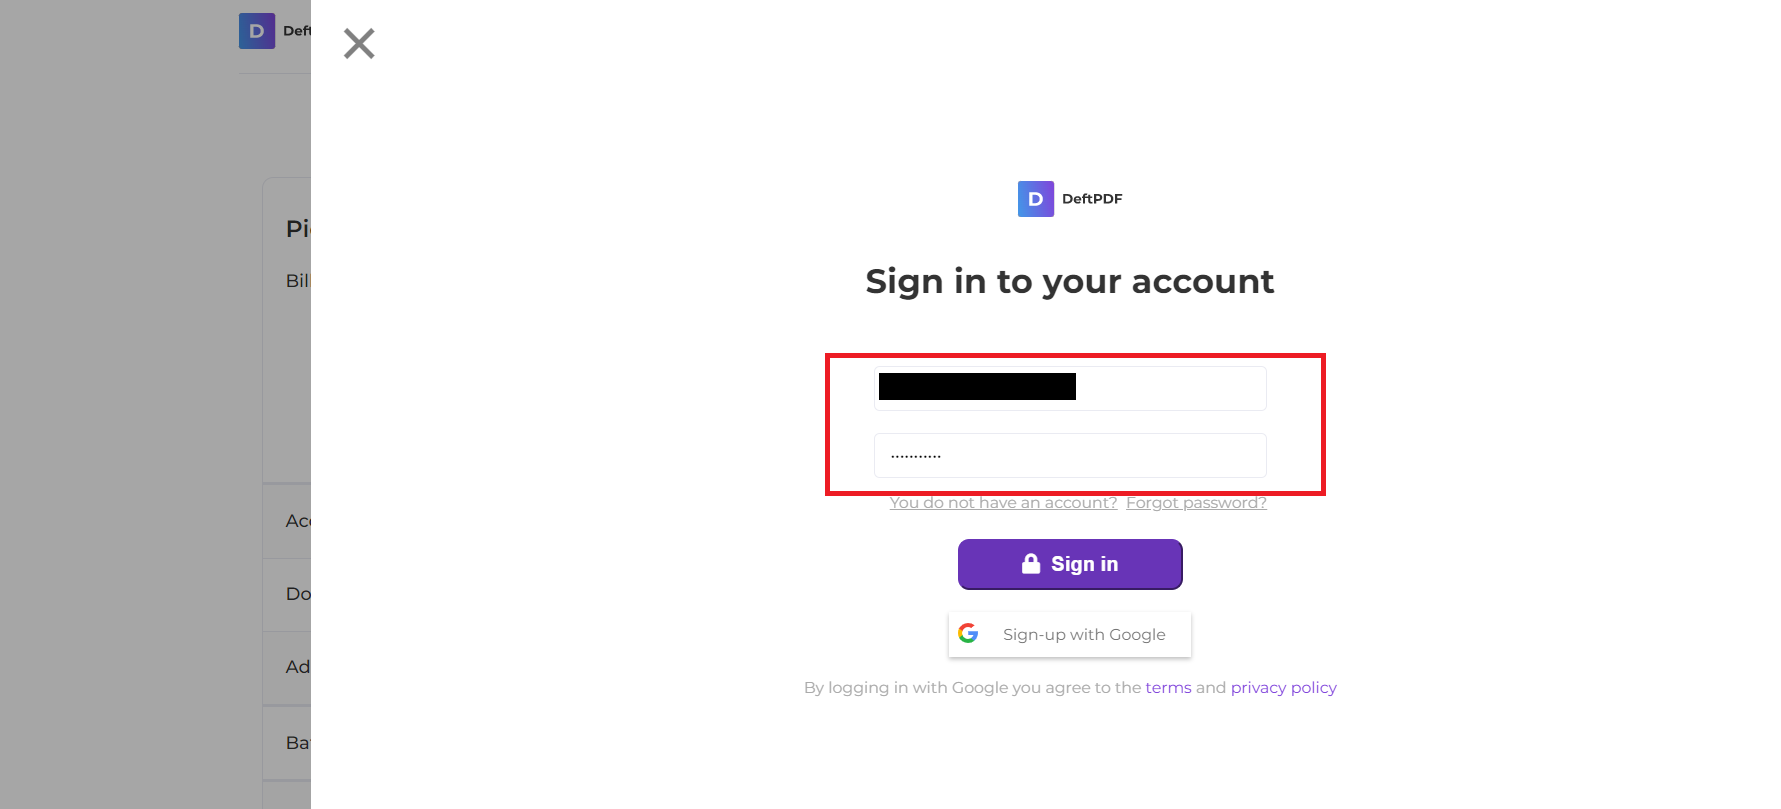 log in your account